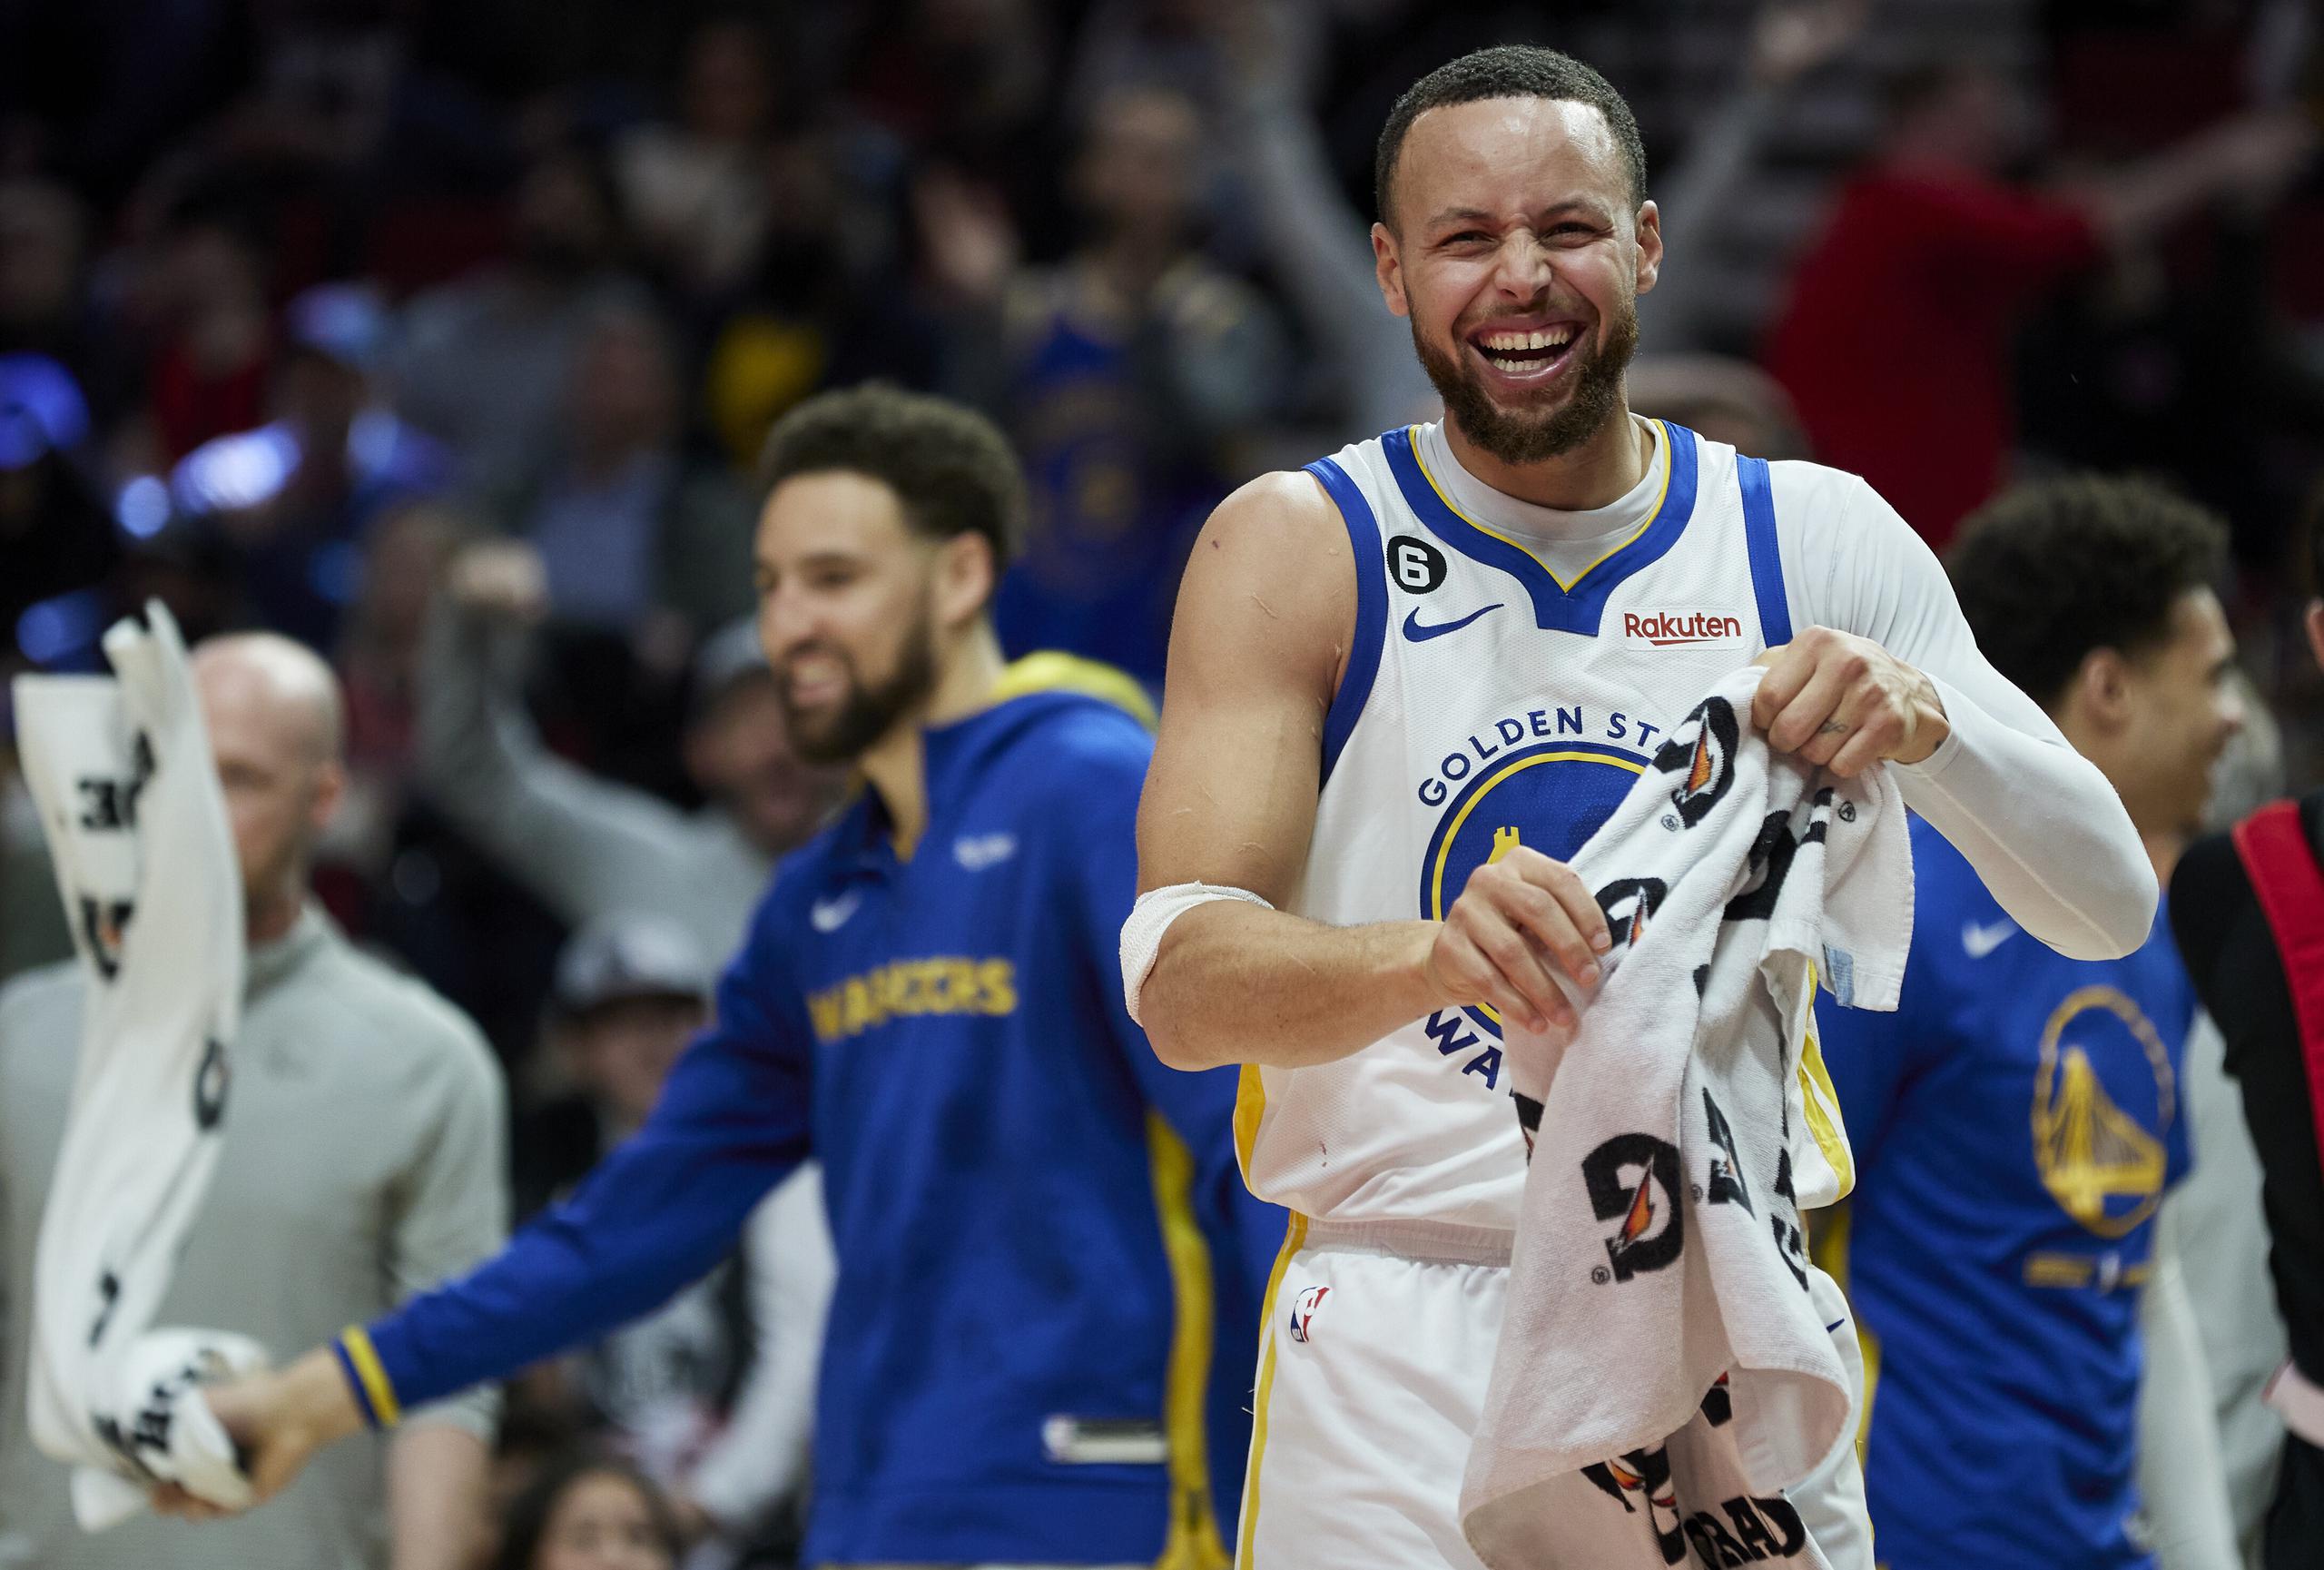 Golden State Warriors guard Stephen Curry (30) reacts after a basket by forward Jonathan Kuminga during the second half of an NBA basketball game in Portland, Ore., Sunday, April 9, 2023. (AP Photo/Craig Mitchelldyer)